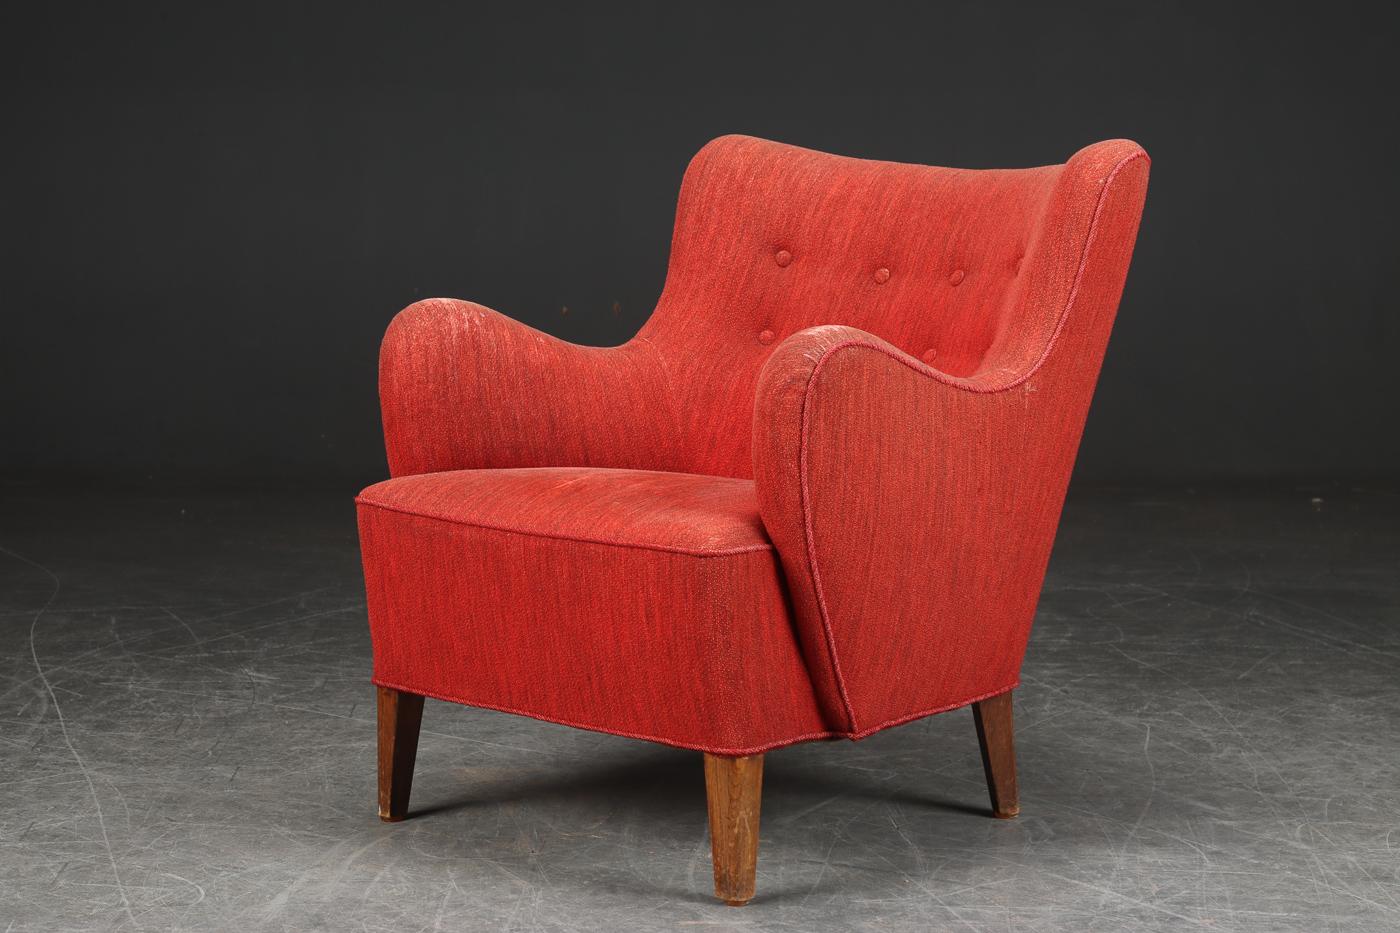 Super charming 1940s lounge chair in the style of Mogens Lassen with very sculptural organic shape and harmonious proportions. Versatile and very suitable for a smaller space in need of a stronger statement. Raised on stained beech legs and beech